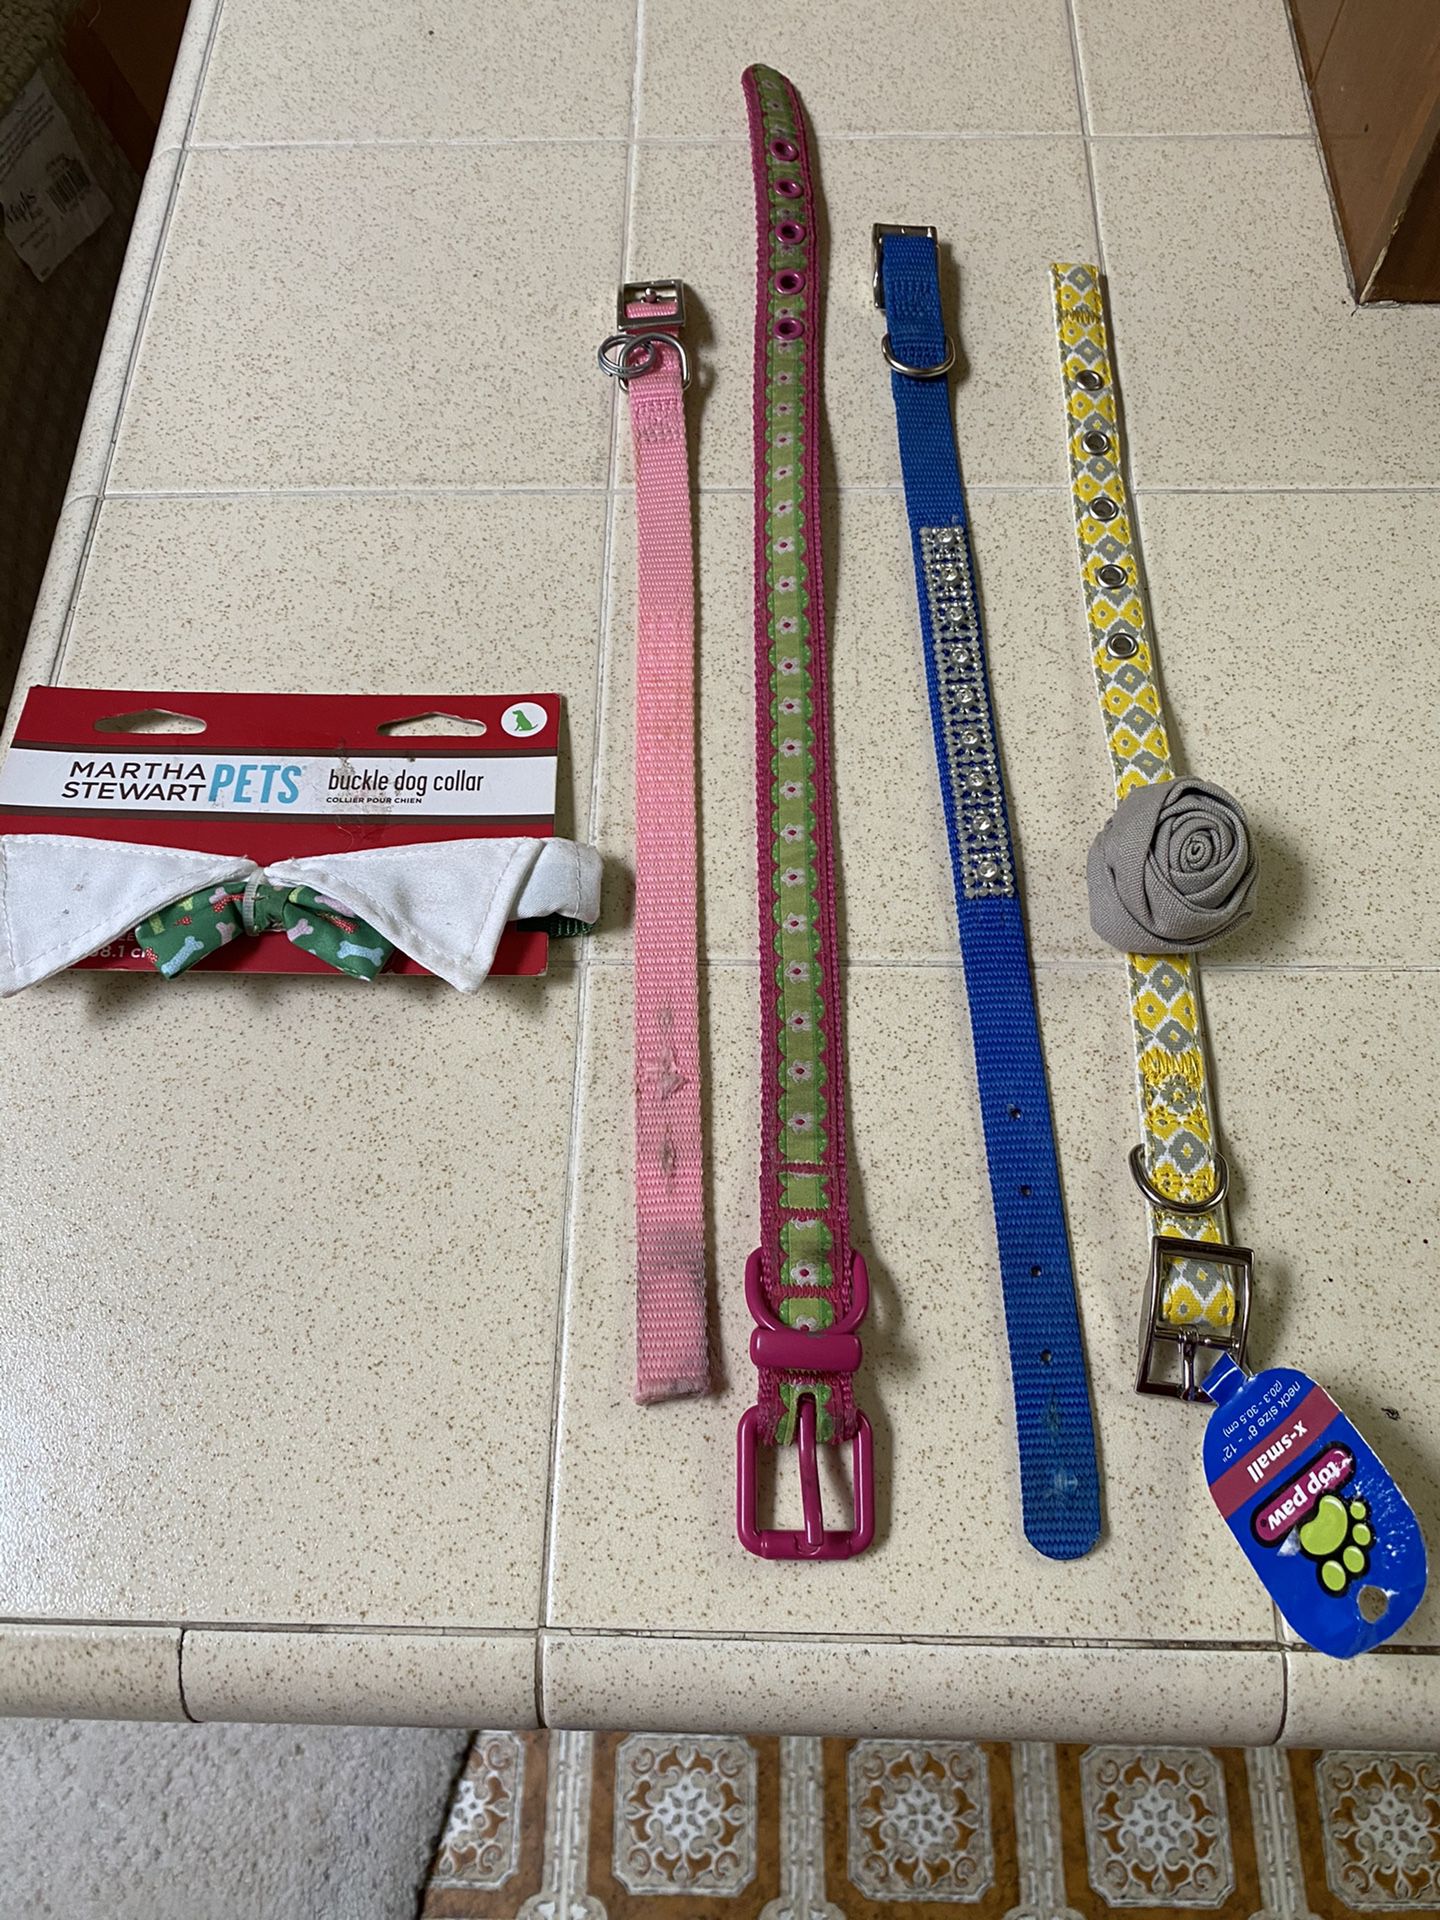 5 Different Sizes Dog Collars 2 New- 3 Slightly Used $3 Each